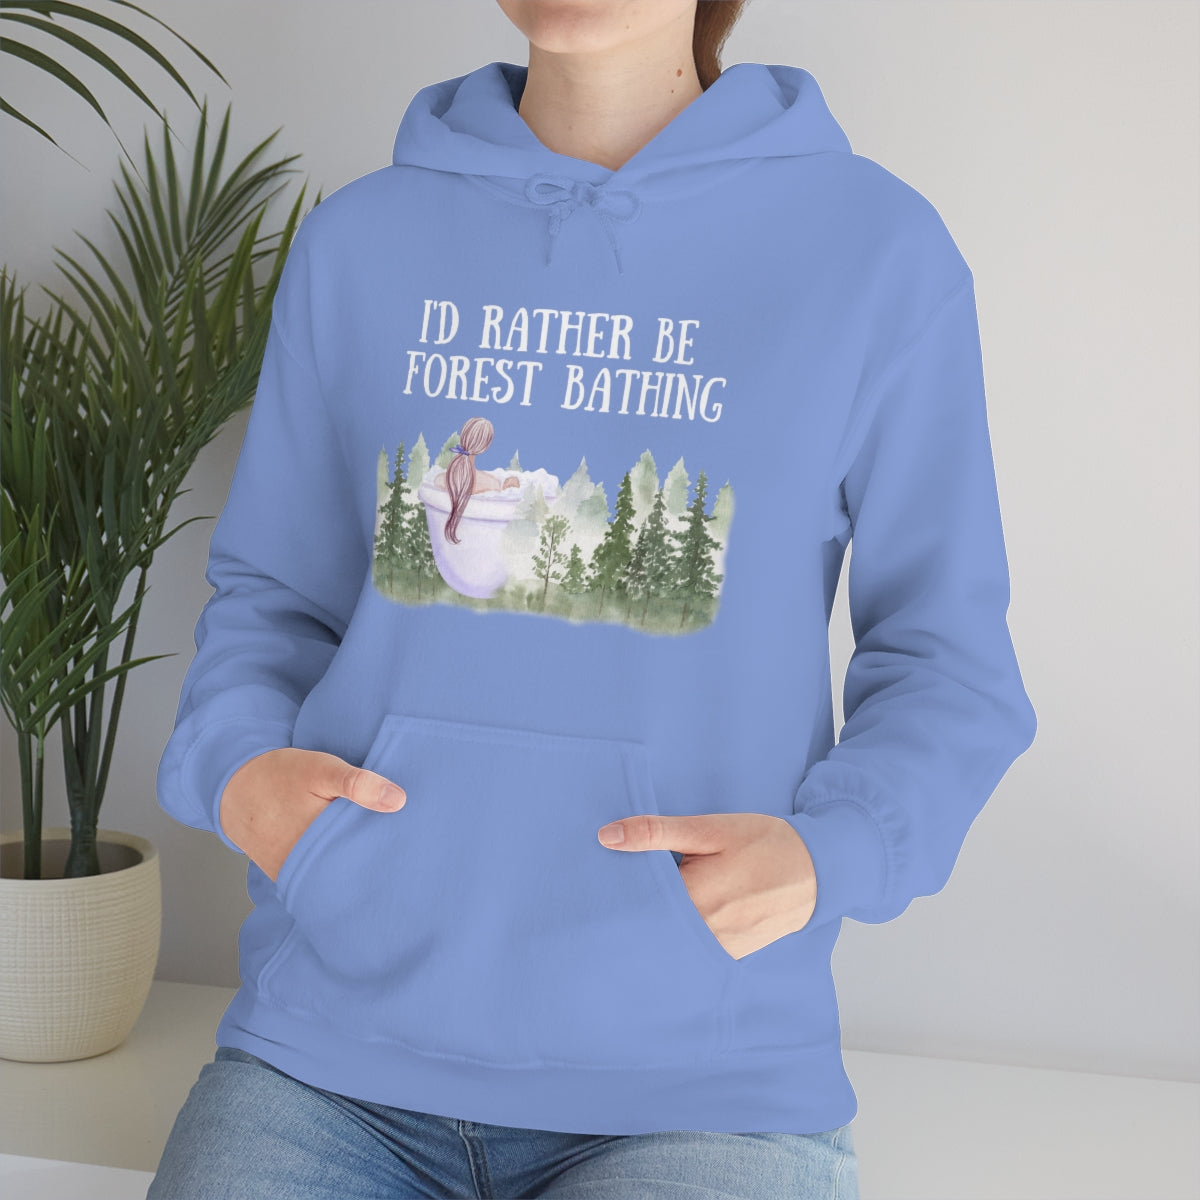 I'd Rather be Forest Bathing